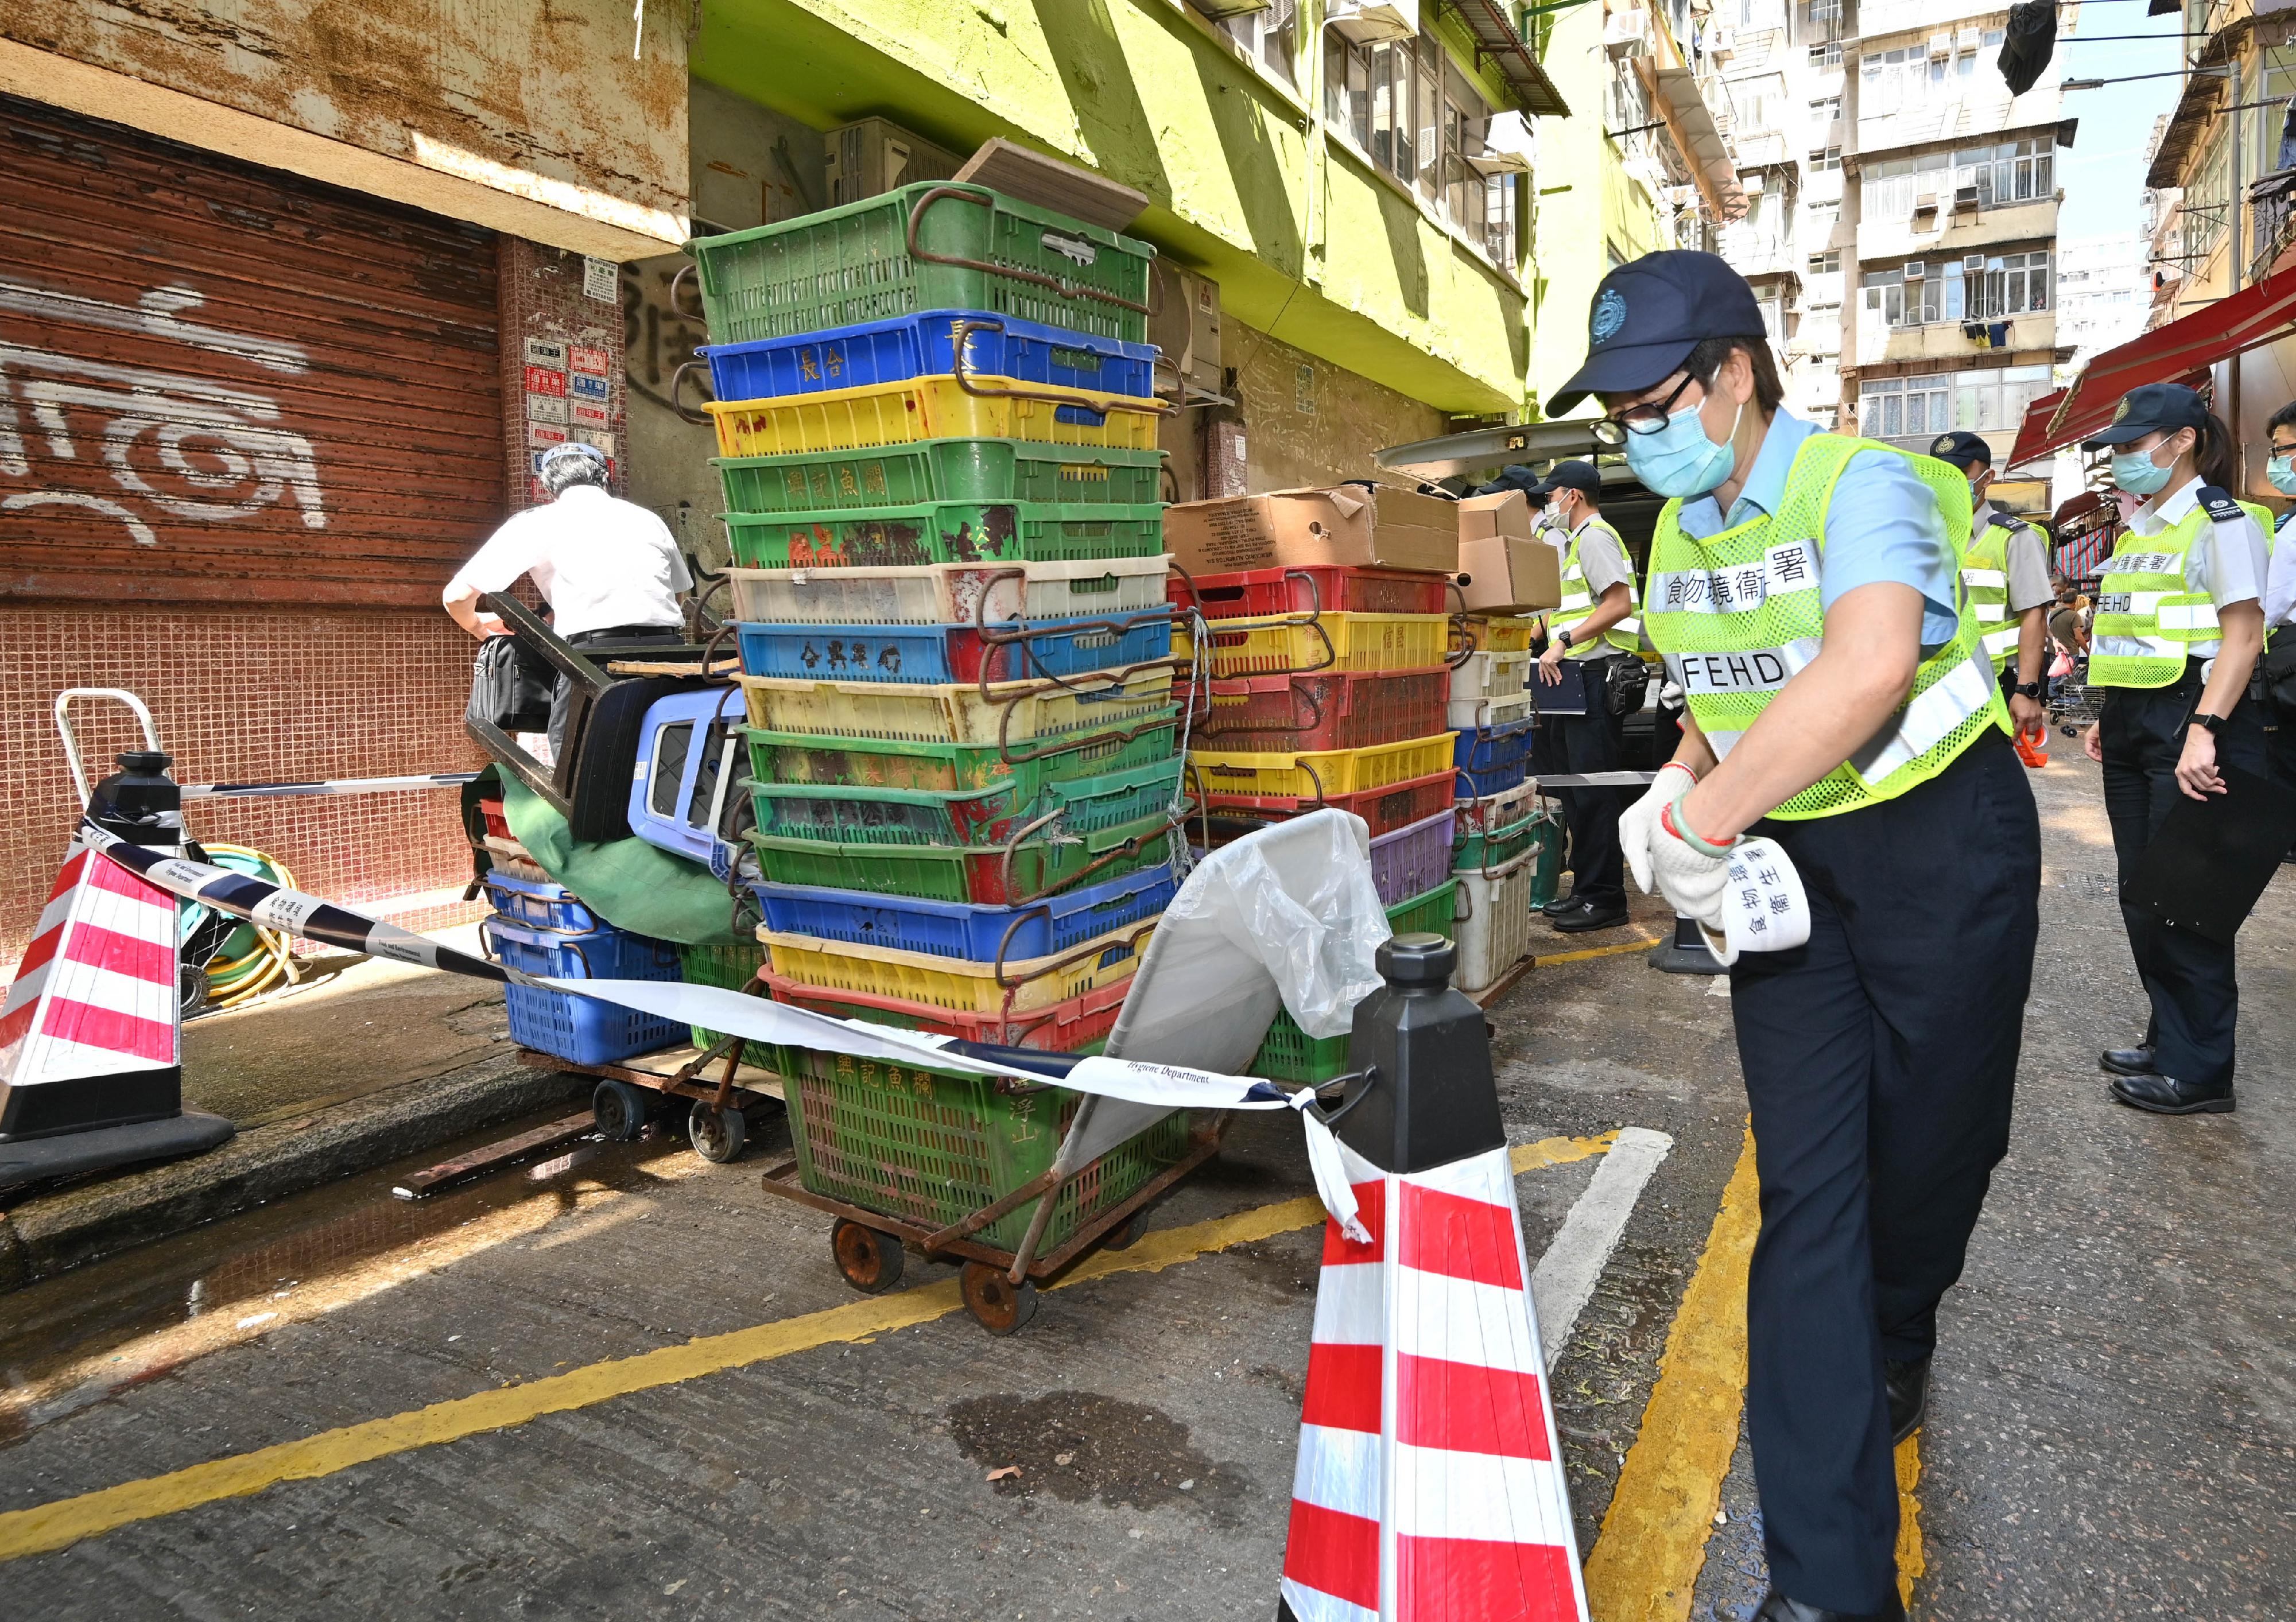 A spokesman for the Food and Environmental Hygiene Department (FEHD) said today (October 24) that the FEHD and the Hong Kong Police Force have conducted a series of stringent enforcement actions against illegal shop front extension activities in various districts since October 3. Photo shows officers of the FEHD conducting an operation in the Mong Kok district earlier.
